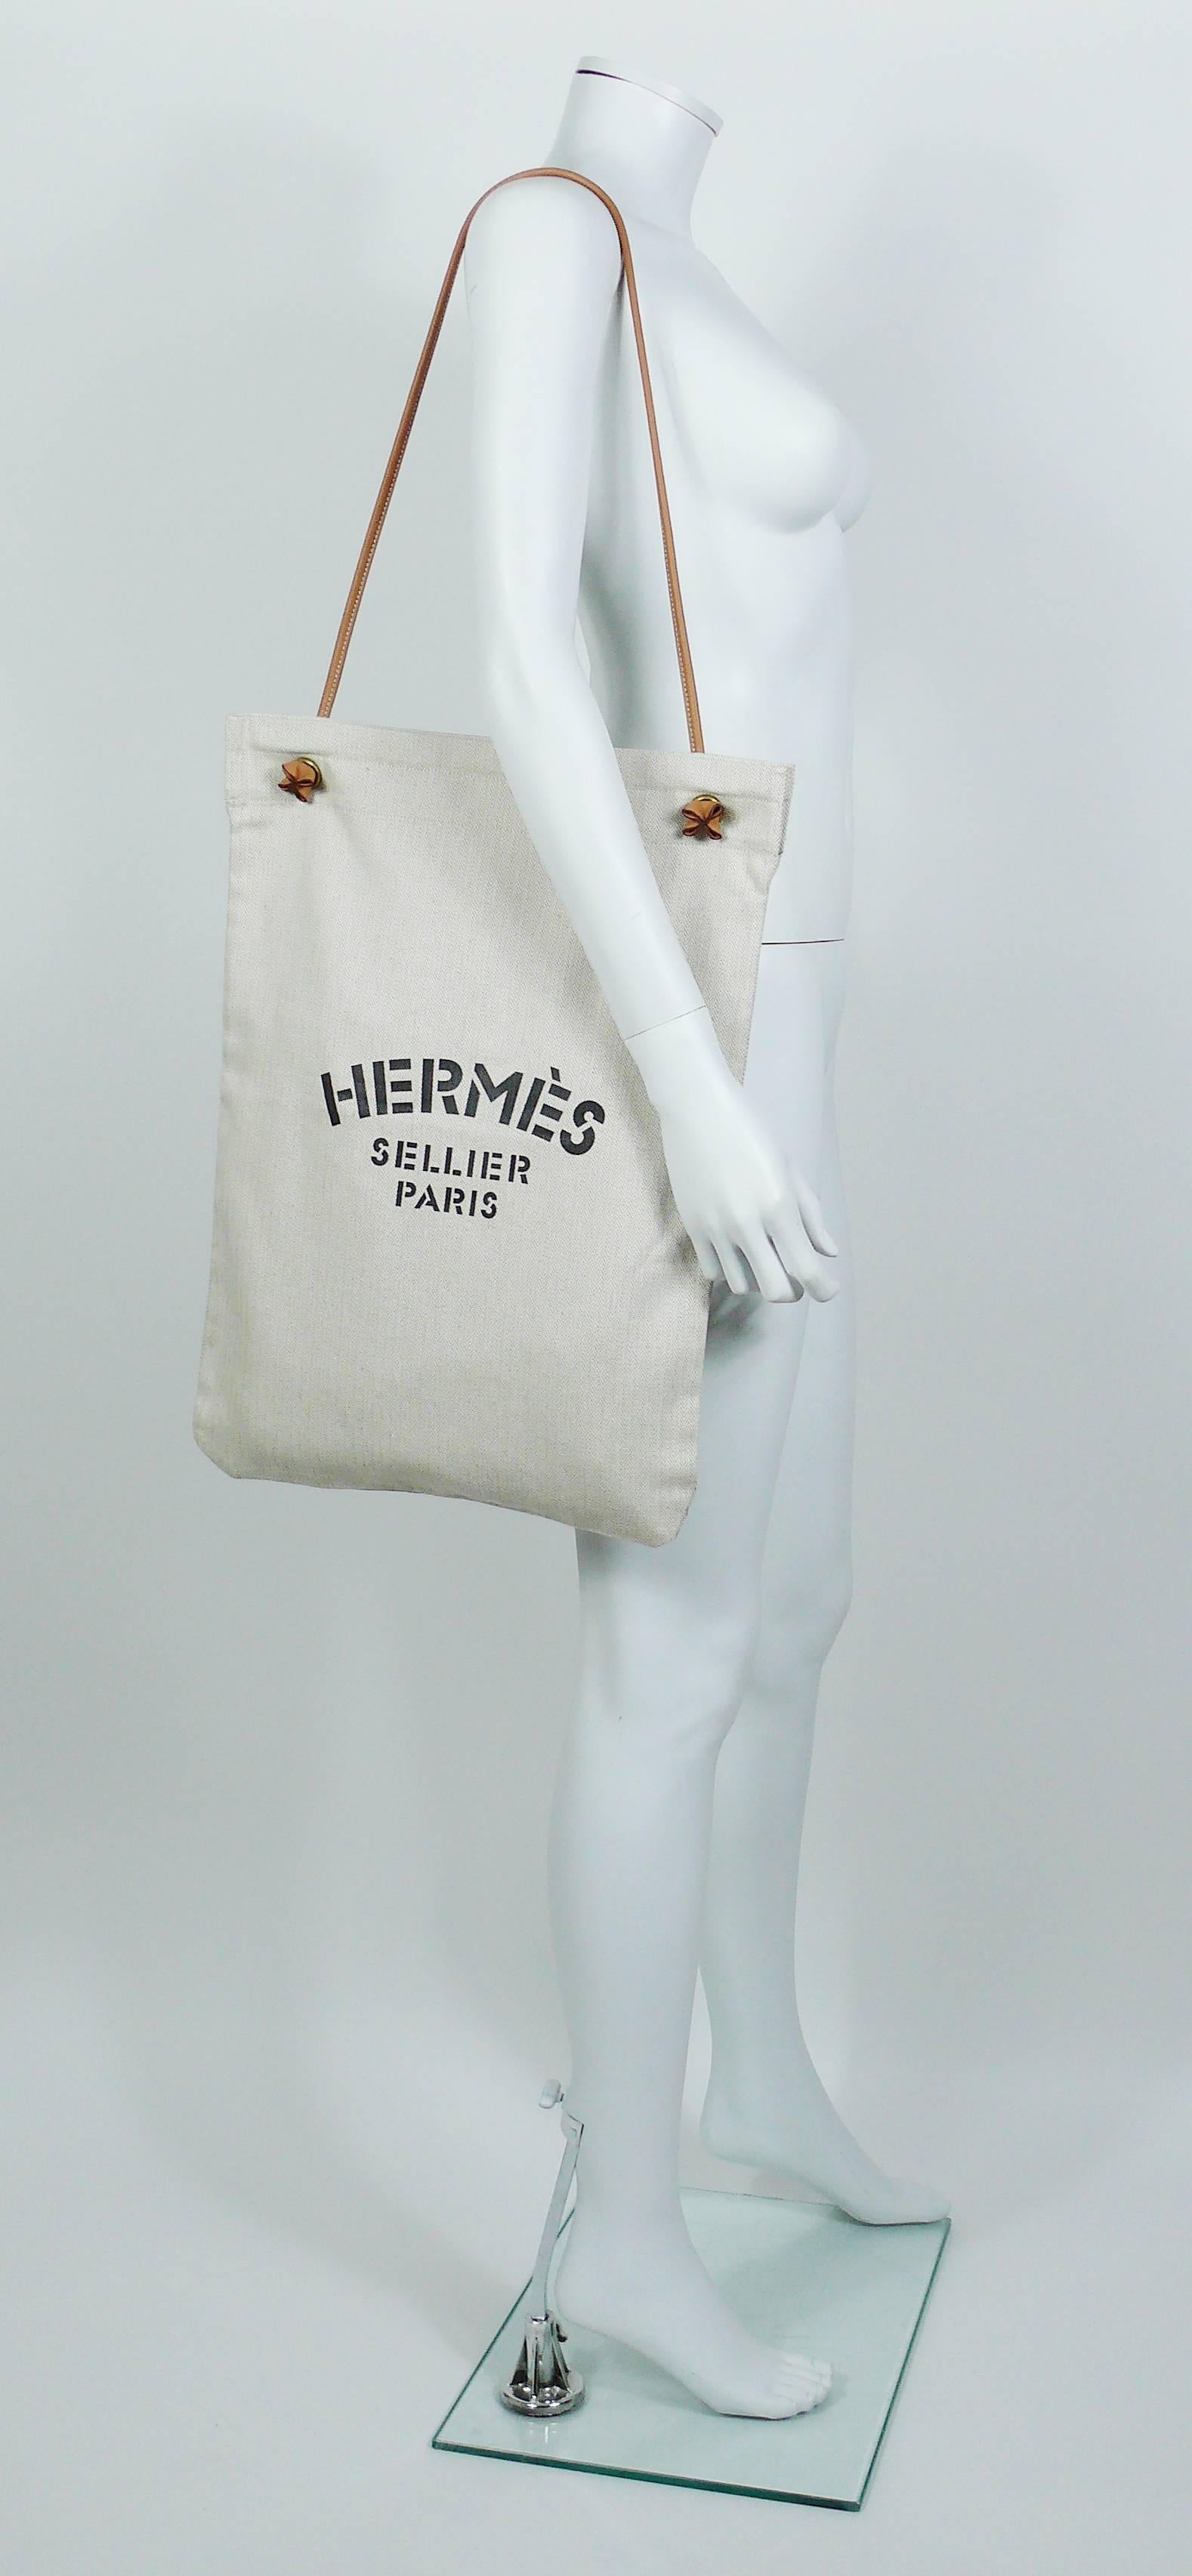 HERMES vintage Aline XL canvas tote bag with "HERMES Sellier Paris" print and brown leather strap.

Label reads HERMES Paris Made in France.

Composition : Cotton / Leather.

Indicative measurements : total height (incl. strap) approx. 80